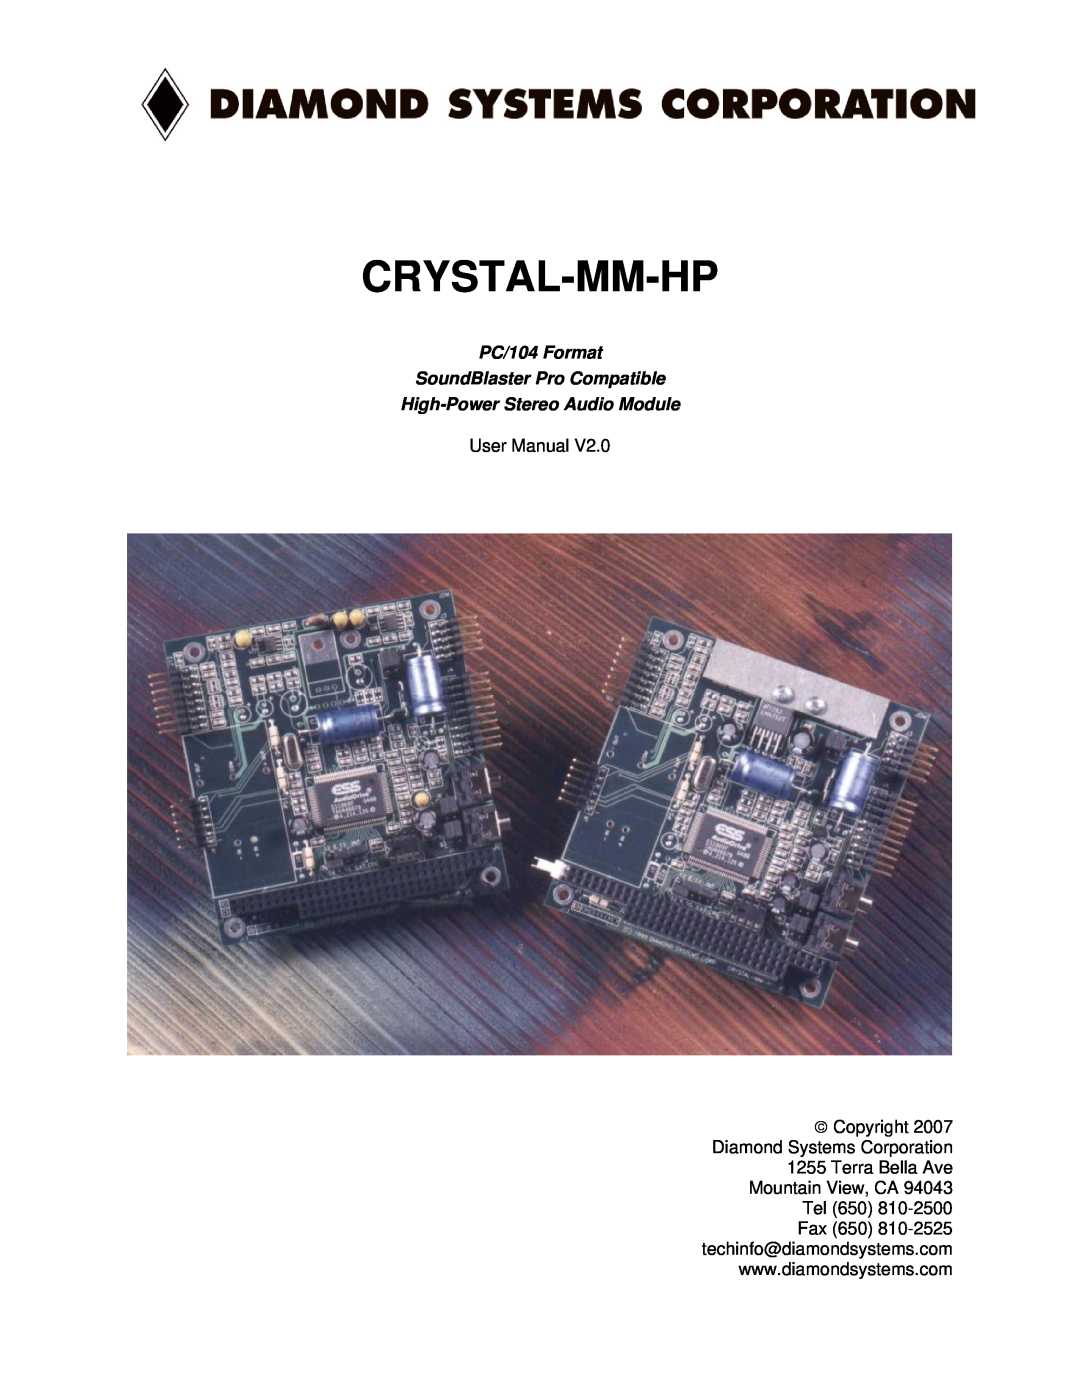 Diamond Systems MM-HP user manual Crystal-Mm-Hp, PC/104 Format SoundBlaster Pro Compatible, High-Power Stereo Audio Module 